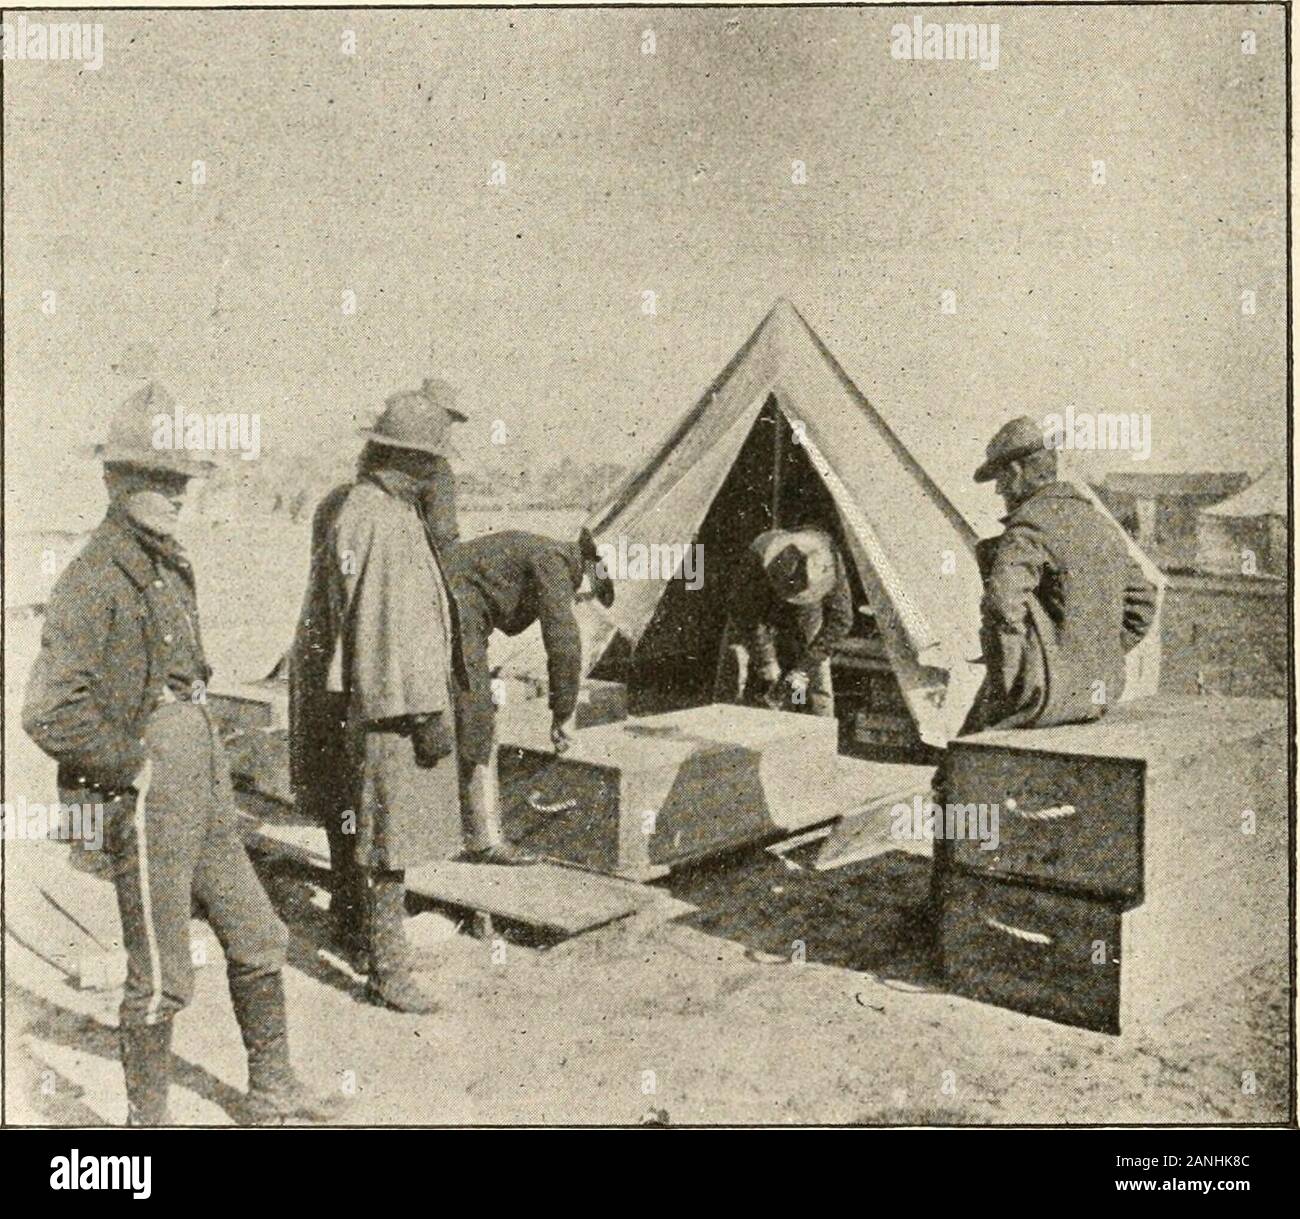 History of the One hundred and sixty-first regiment, Indiana volunteer infantry . arture began, as the arrival of the transport was dailyexpected. The company tents were to be left, and allofficers tents were taken with one exception. Captain?Guthrie was highly elated over an ingenious contrivanceior heating his tent; he knew what destruction a lamp hadcaused before, but scorning experience he passed many acomfortable night while his less ingenious fellow officerswere breathing hard to warm the space underneath the-covers. The midnight hour of December 8 had passedwhen the explosion came which Stock Photo